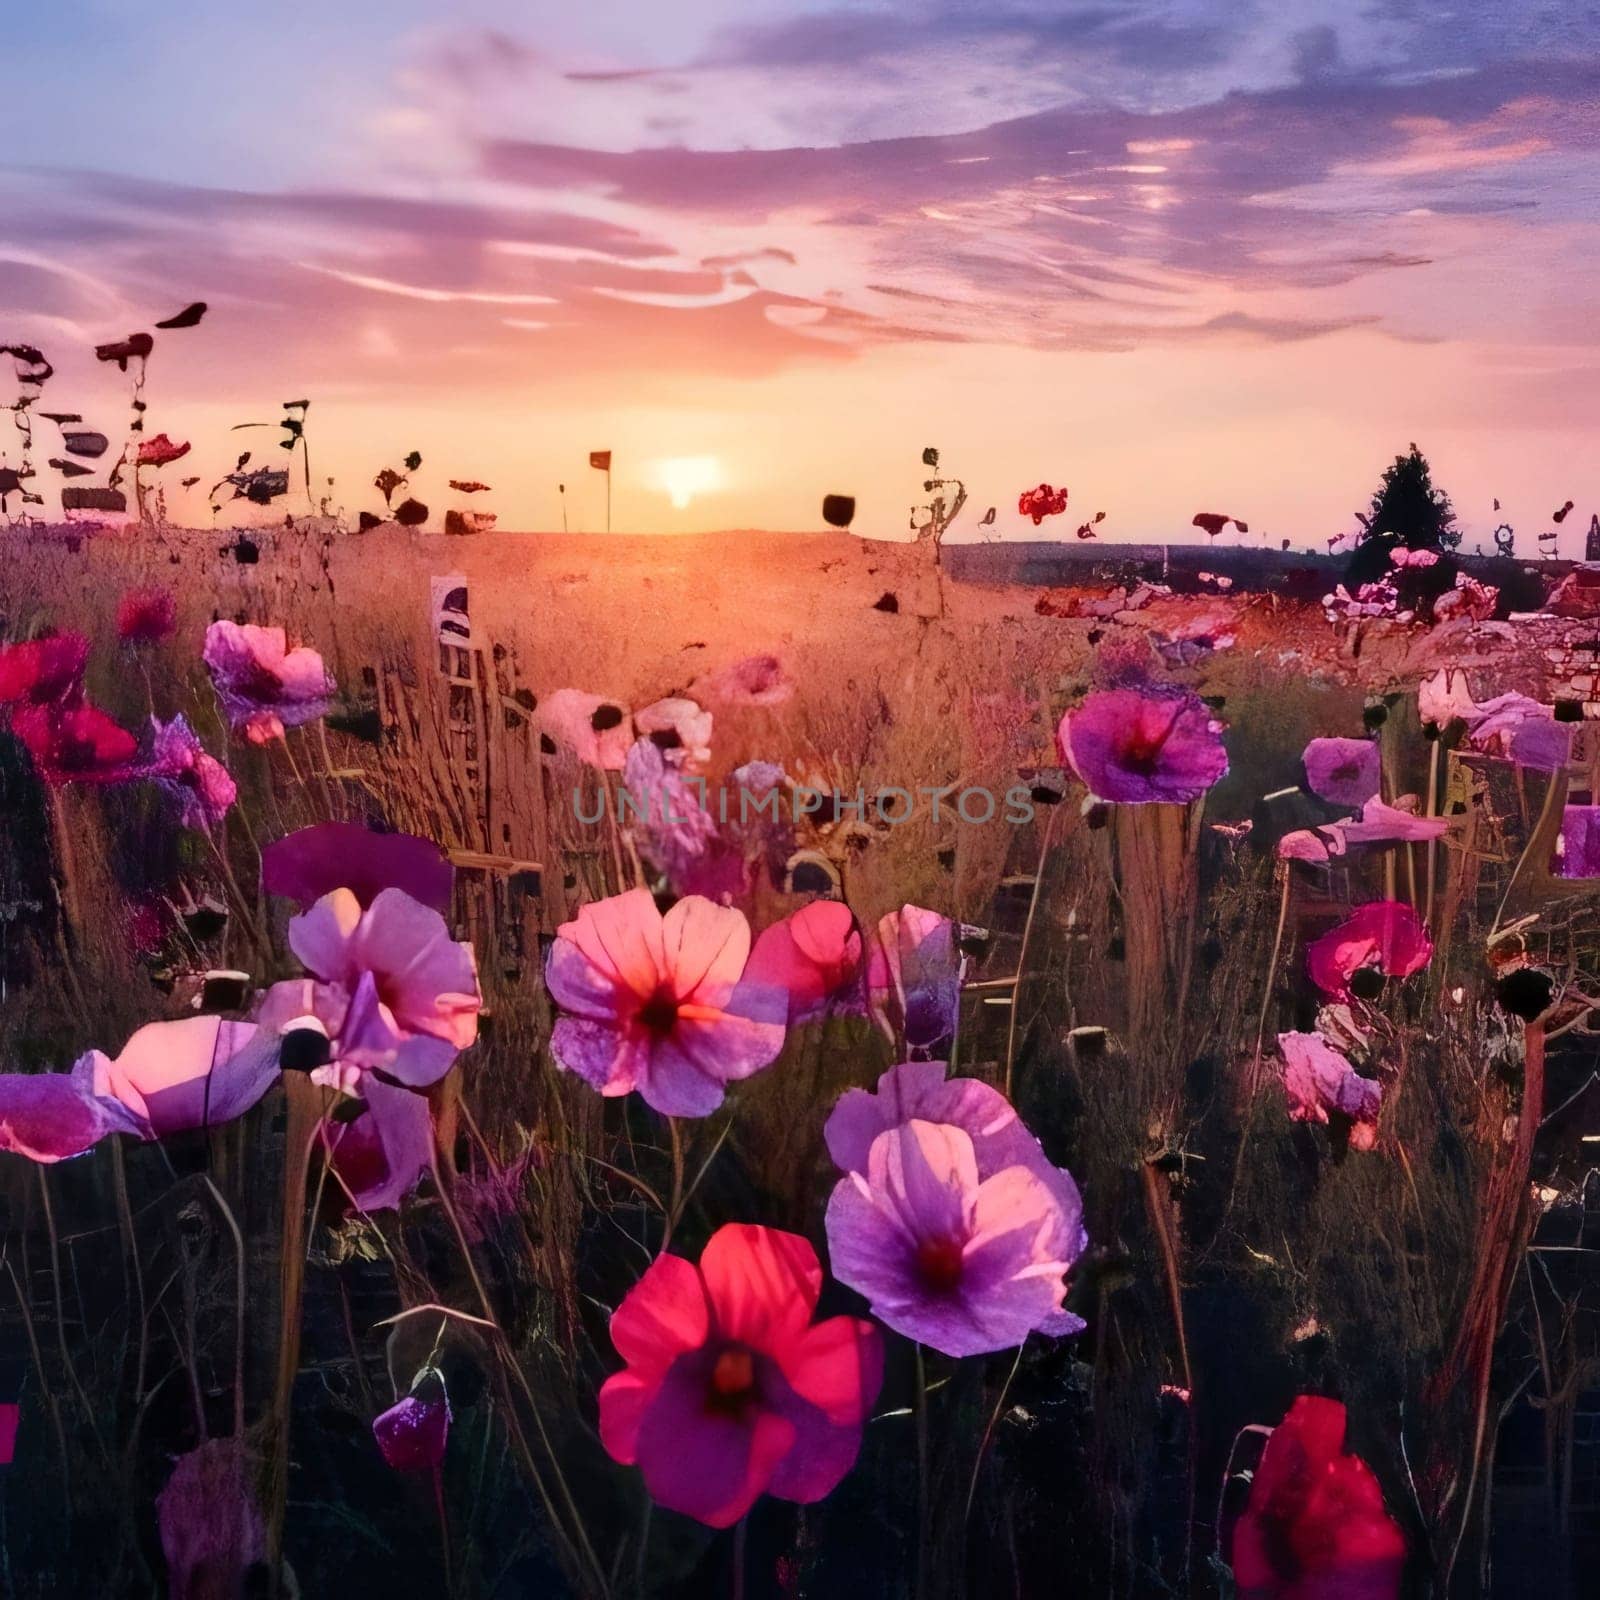 Illustration of a field full of pink flowers in the sunshine, at sunset. Flowering flowers, a symbol of spring, new life. by ThemesS